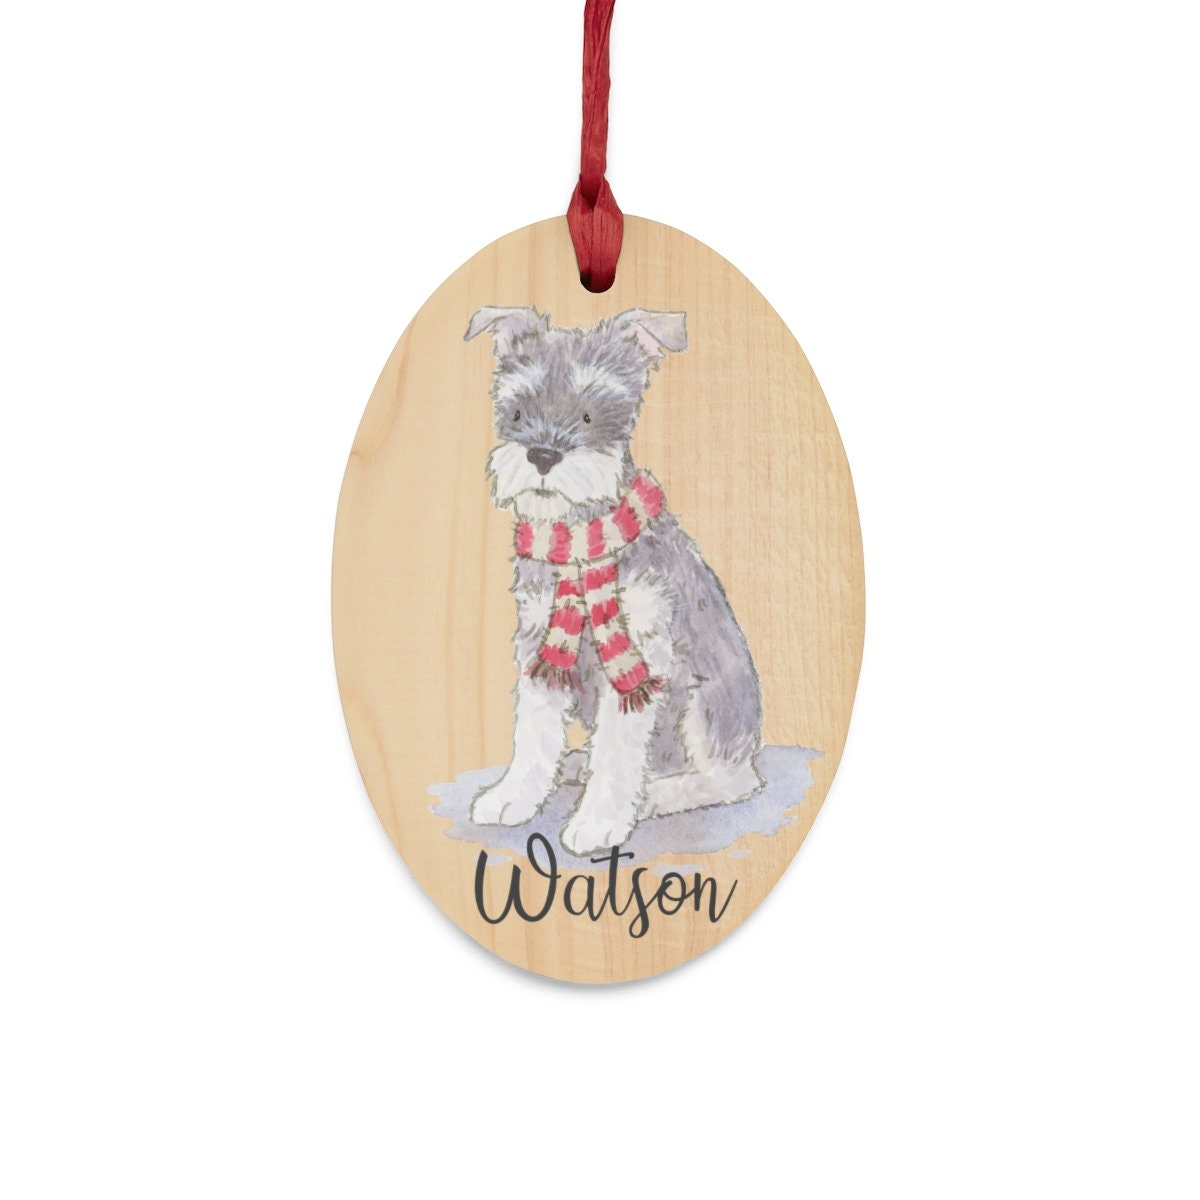 Schnauzer Ornament, Rustic Wood Ornament, Schnauzer Gift, Schnauzer Lover Gift, Schnauzer Christmas, Stocking Stuffer, Gift for Dog Lovers